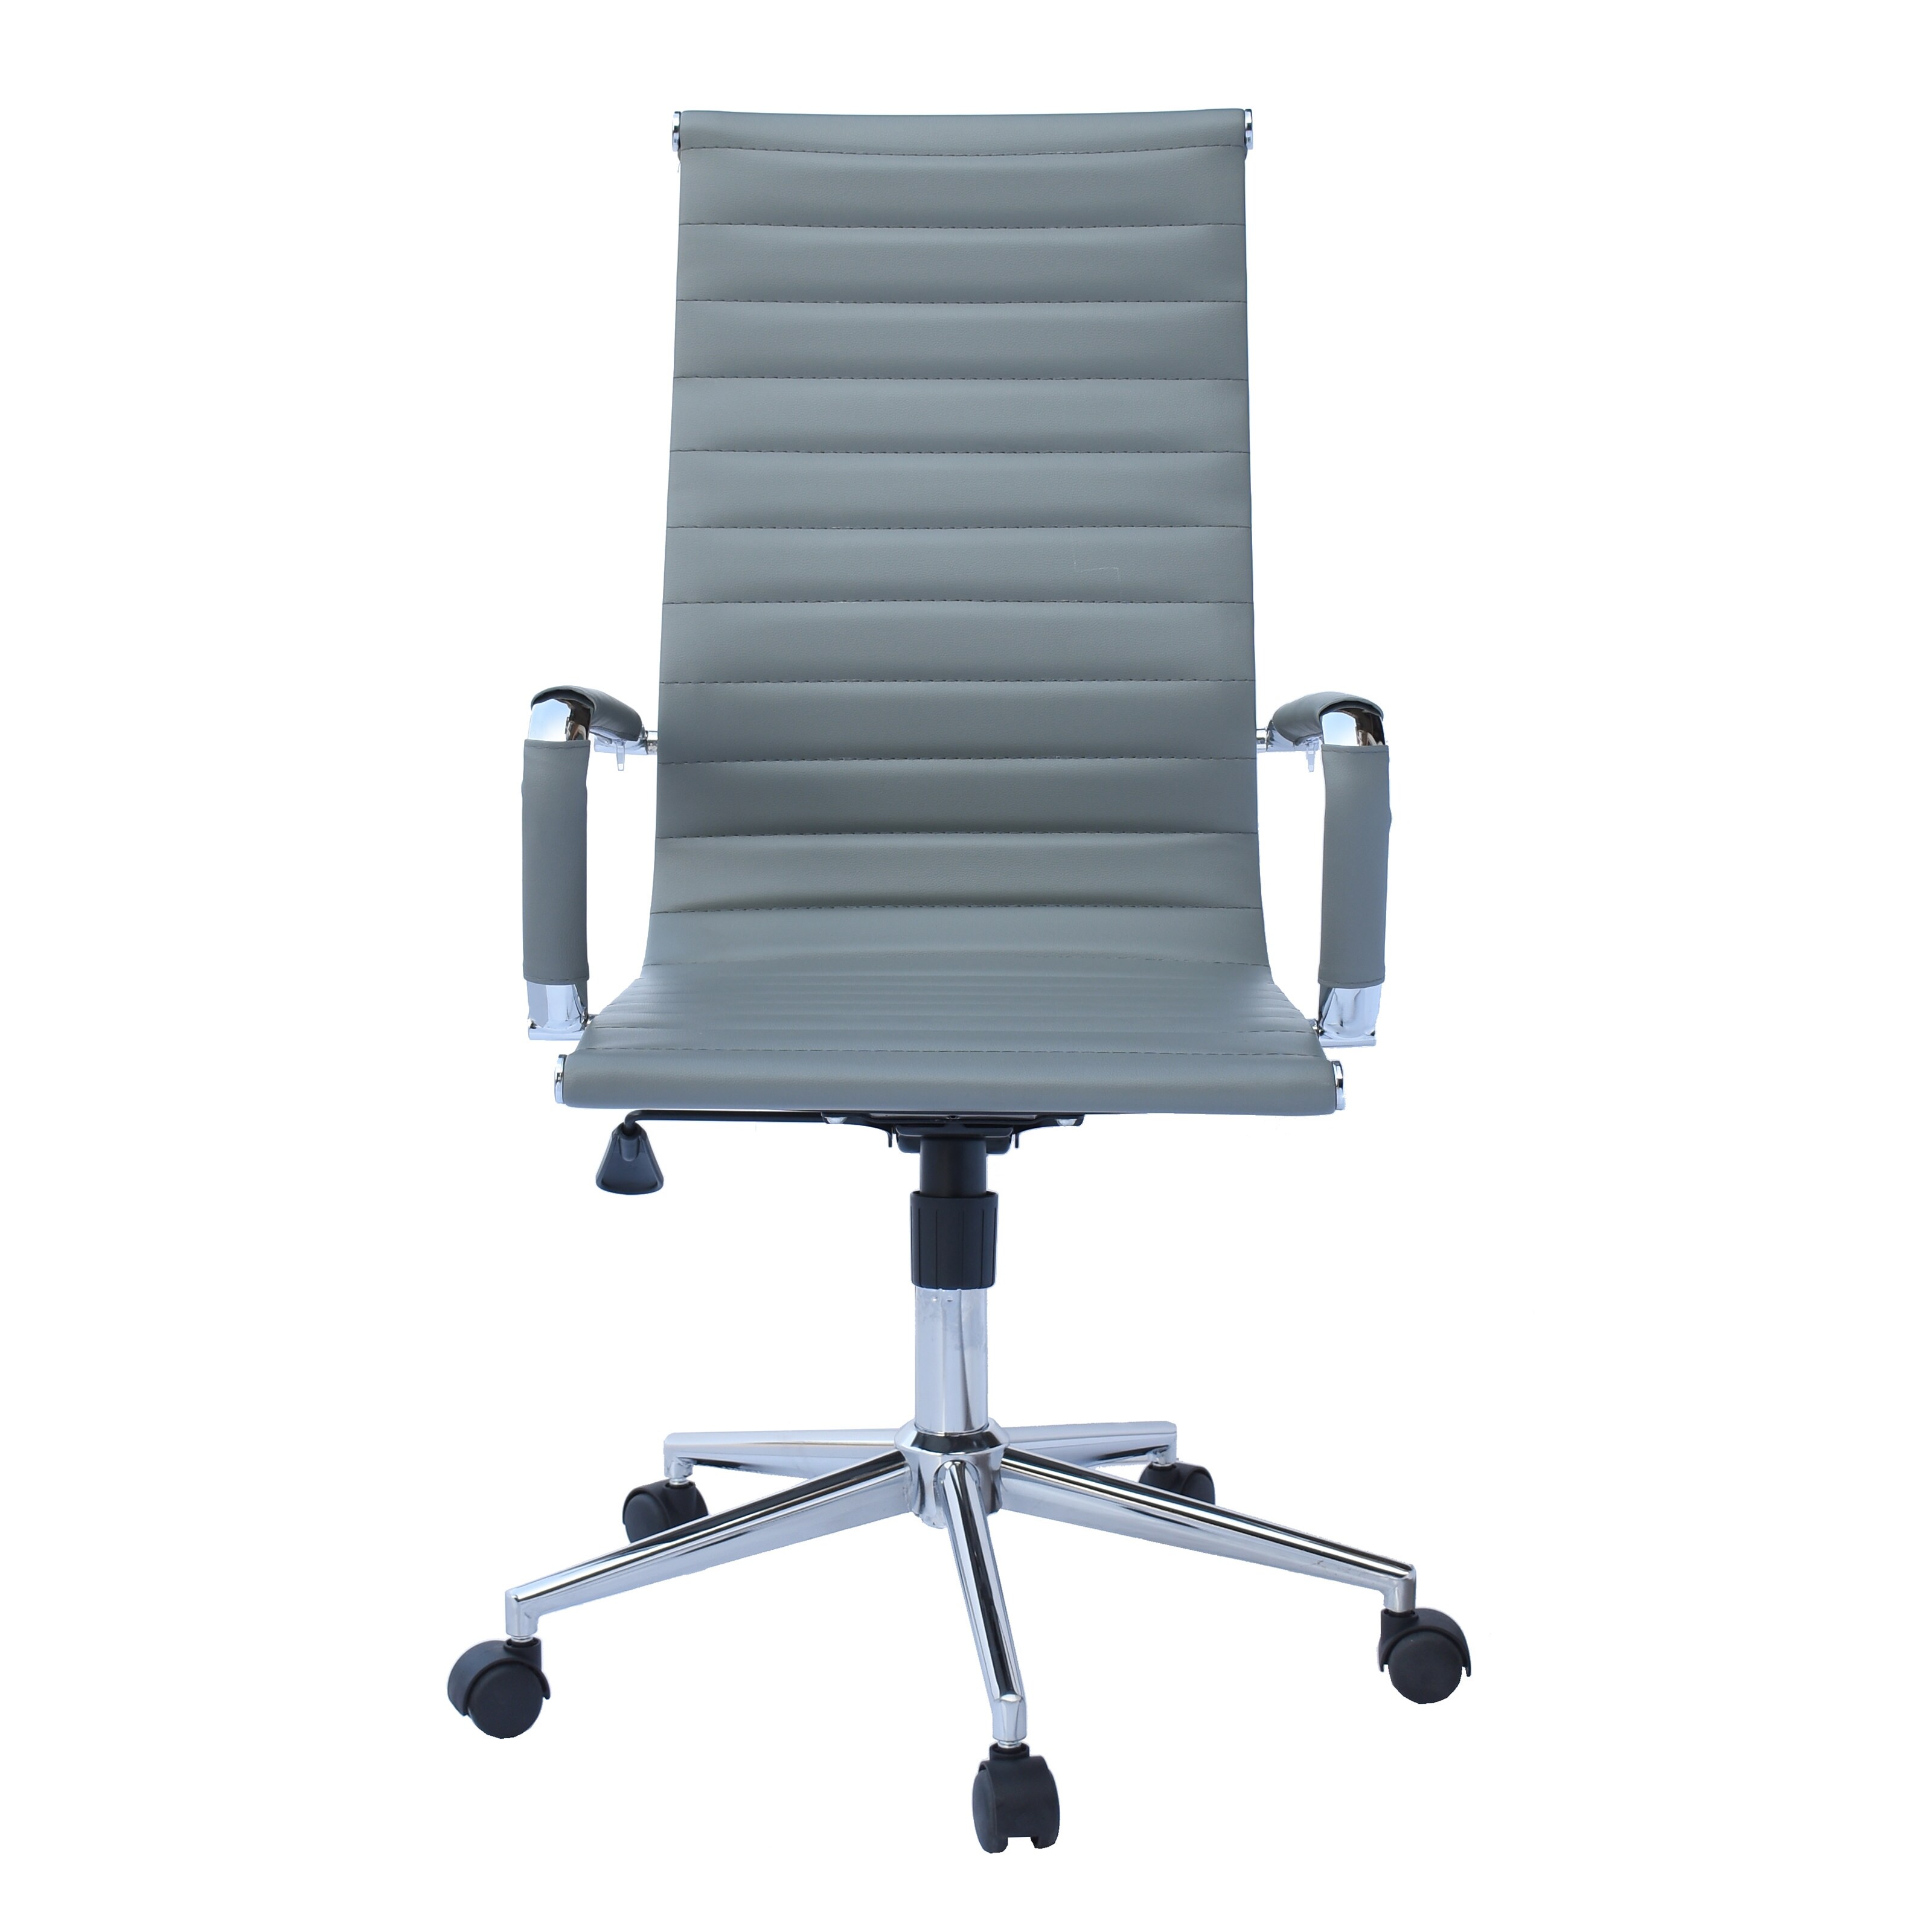 https://ak1.ostkcdn.com/images/products/is/images/direct/a85e999bf3030ab547e67da1036fc9740b27dcd4/Modern-High-Back-Office-Chair-Ribbed-PU-Leather-Tilt-Adjustable-Conference-Room-Home.jpg